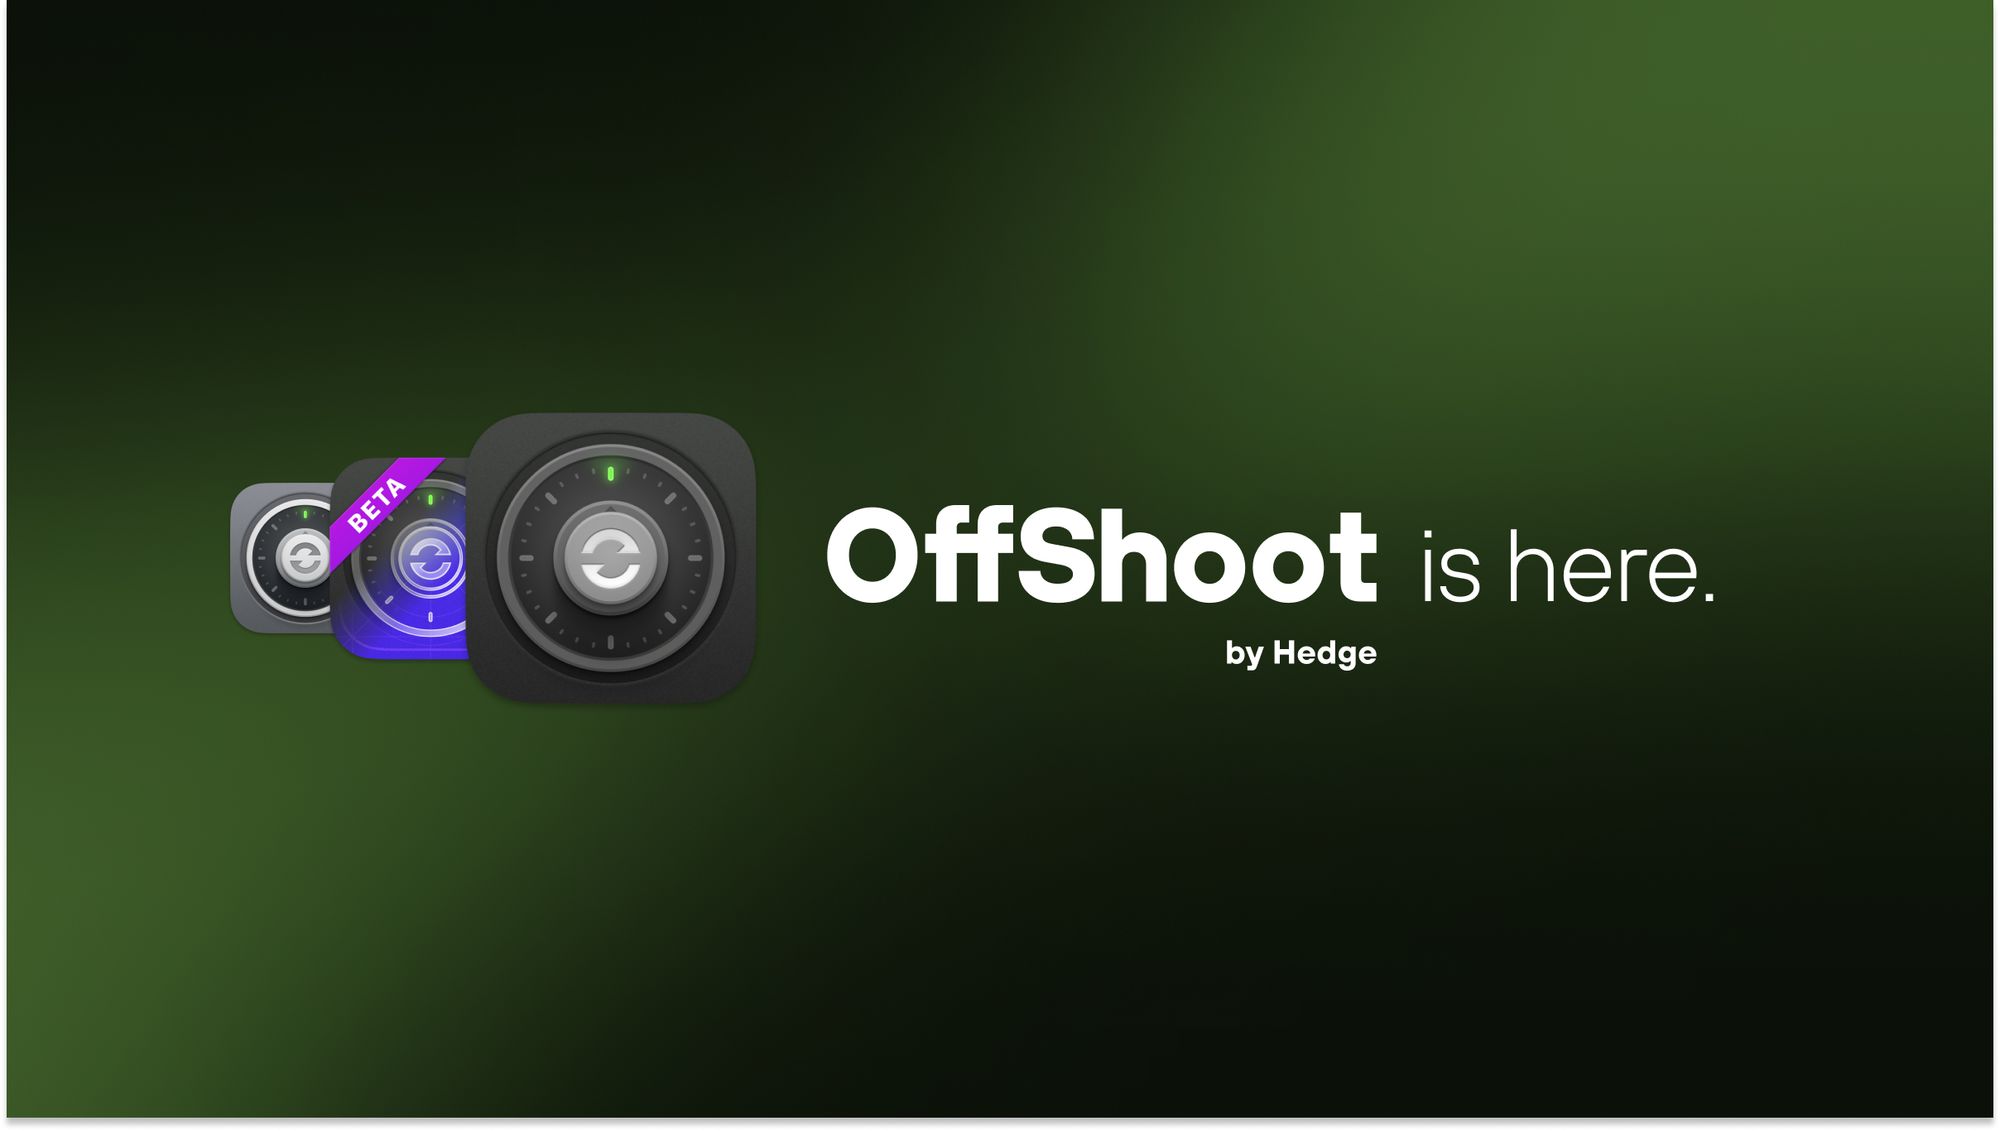 Press Release: OffShoot, the next generation Hedge